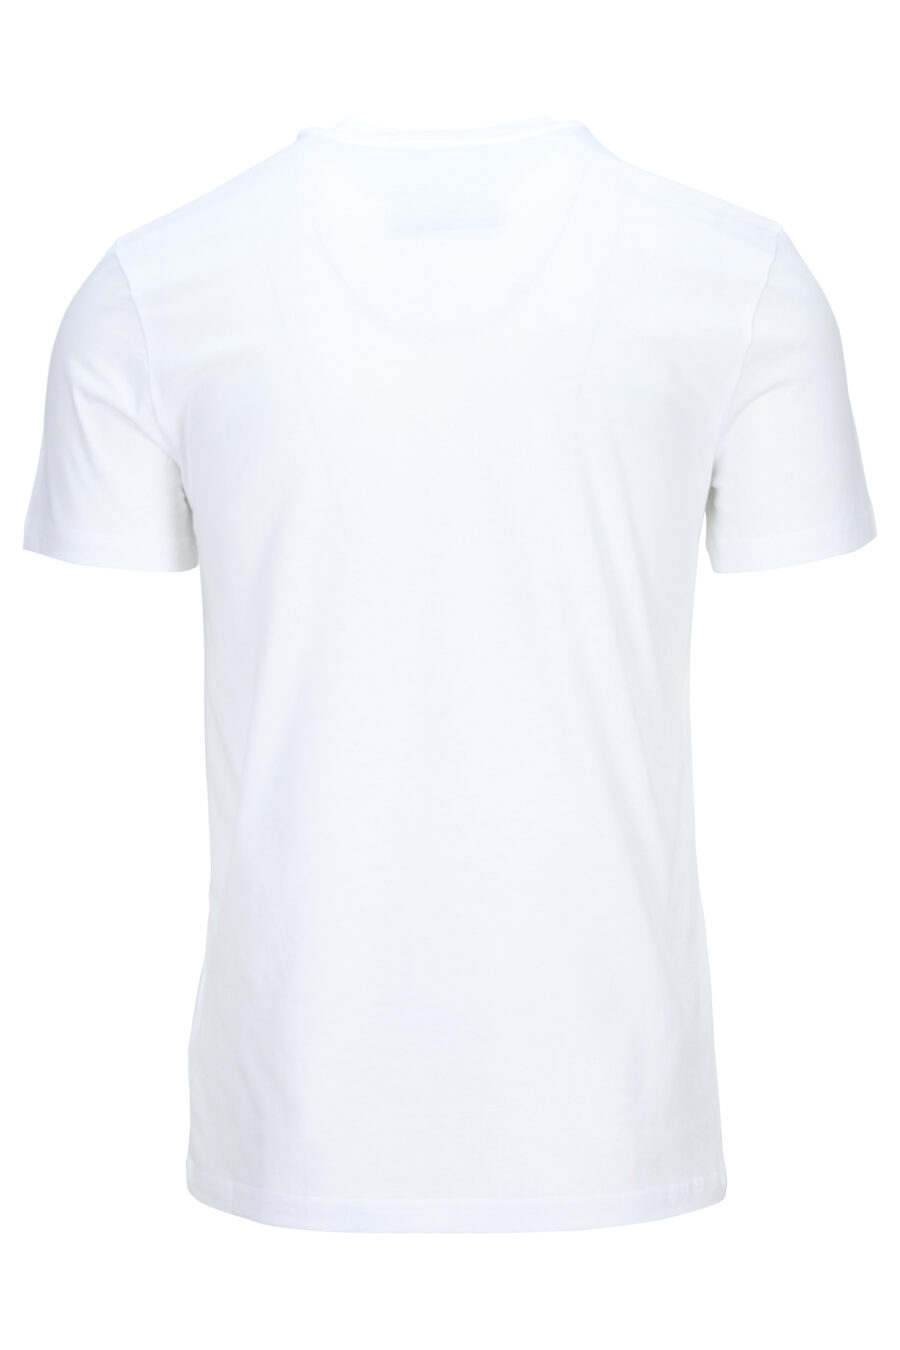 White T-shirt with double maxillover question - 889316649710 1